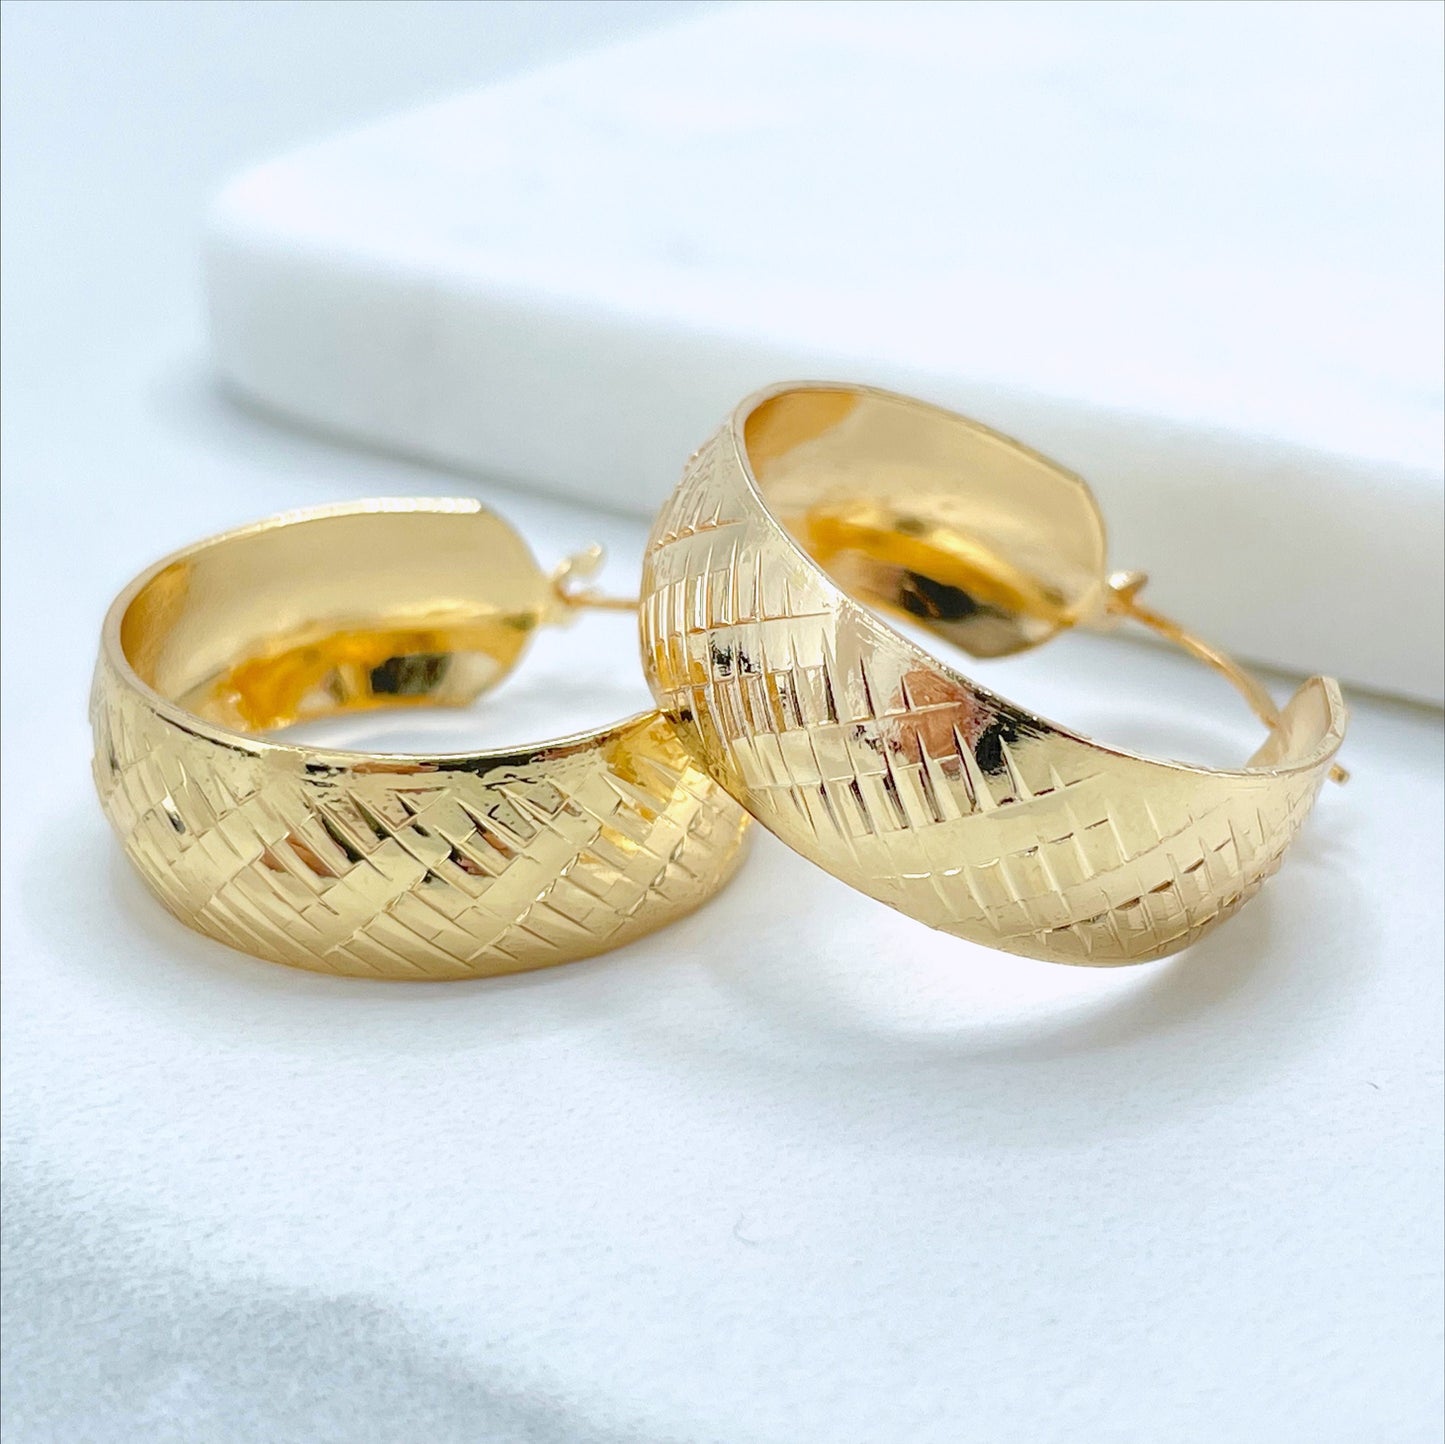 18k Gold Filled 9mm Thickness 25mm Textured Hoop Earrings Wholesale Jewelry Making Supplies